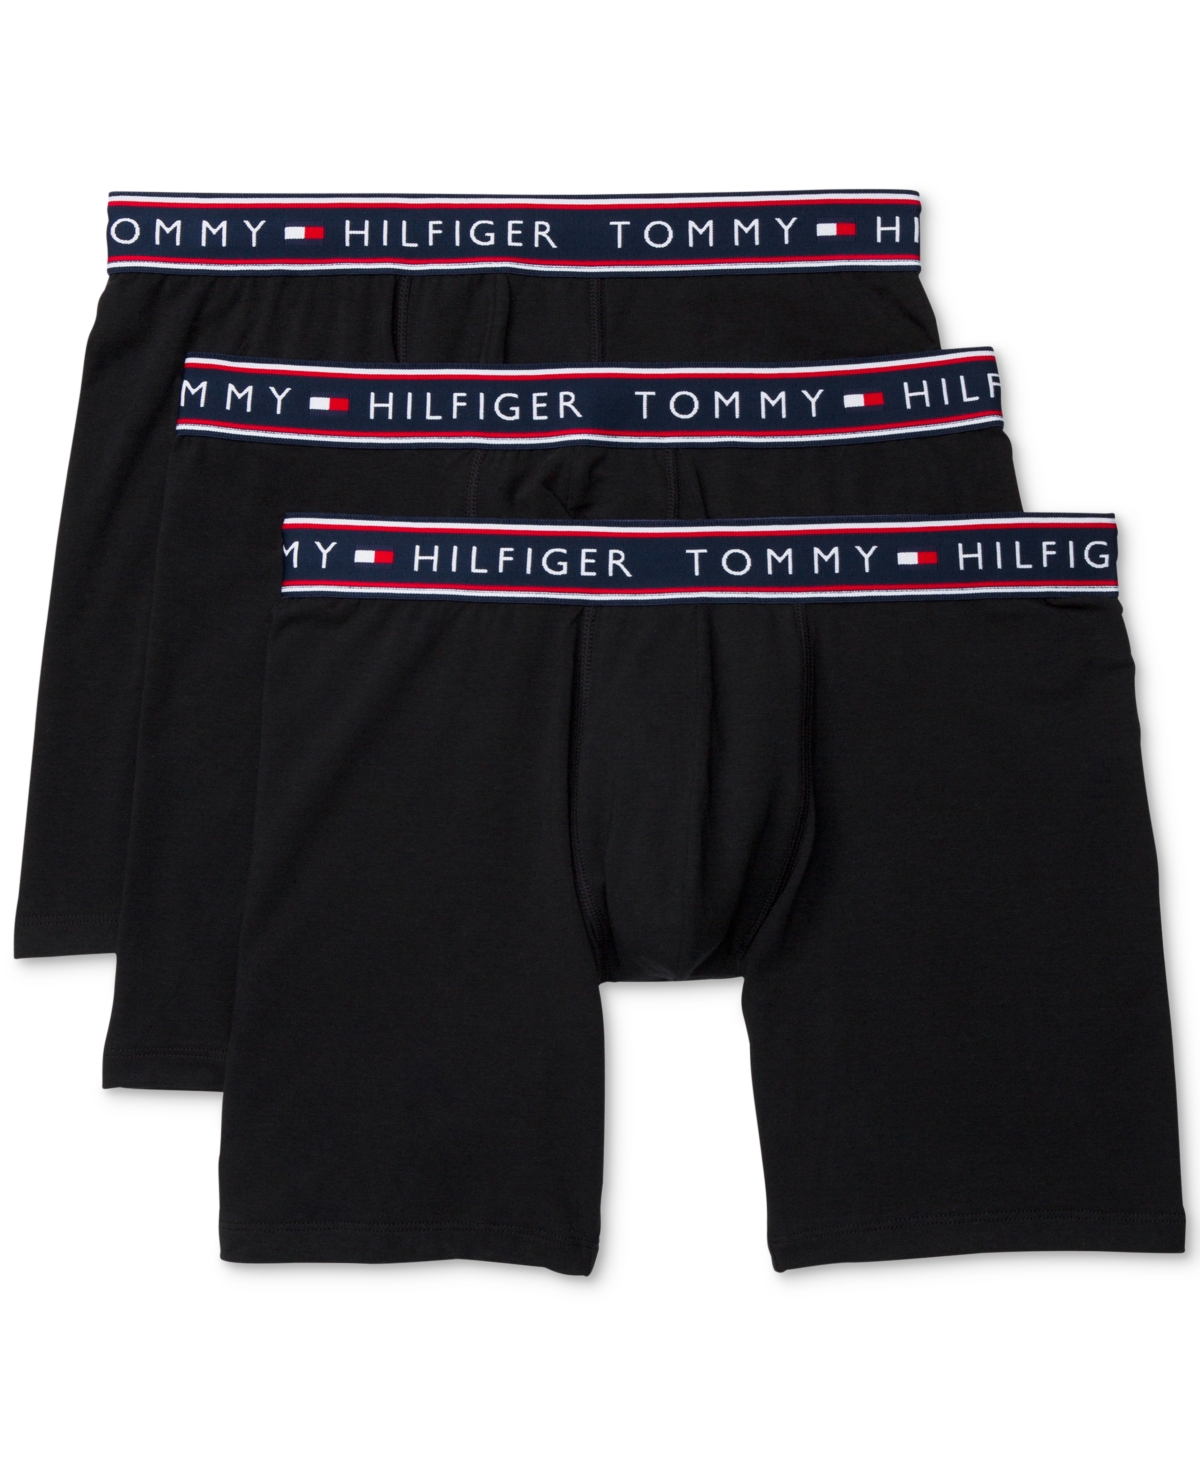 UPC 088541539272 product image for Tommy Hilfiger Men's Cotton Stretch Boxer Brief, 3 Pack | upcitemdb.com